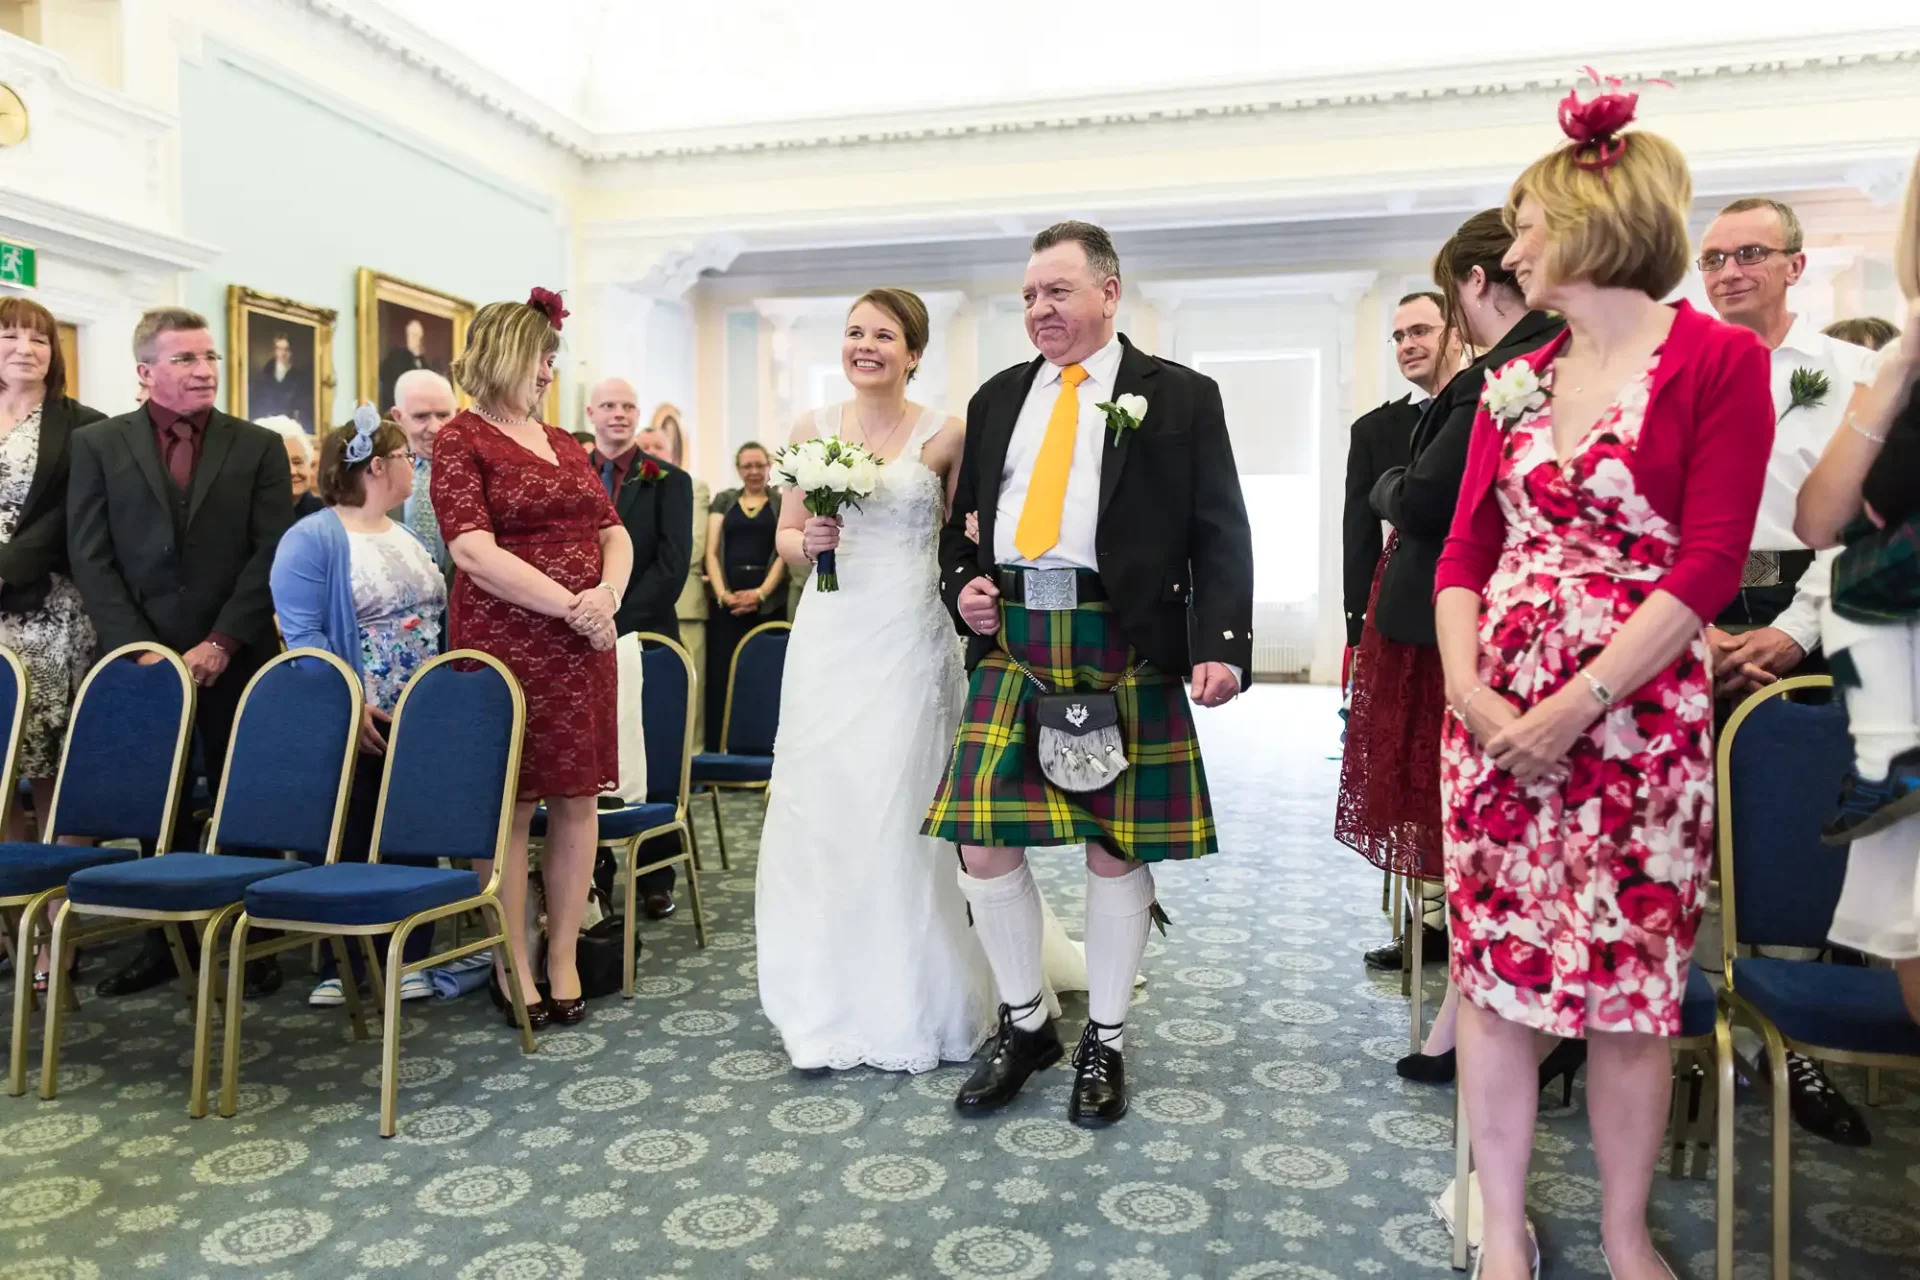 Bride and groom walking down the aisle, the groom in a traditional kilt, surrounded by smiling guests in a decorated room.